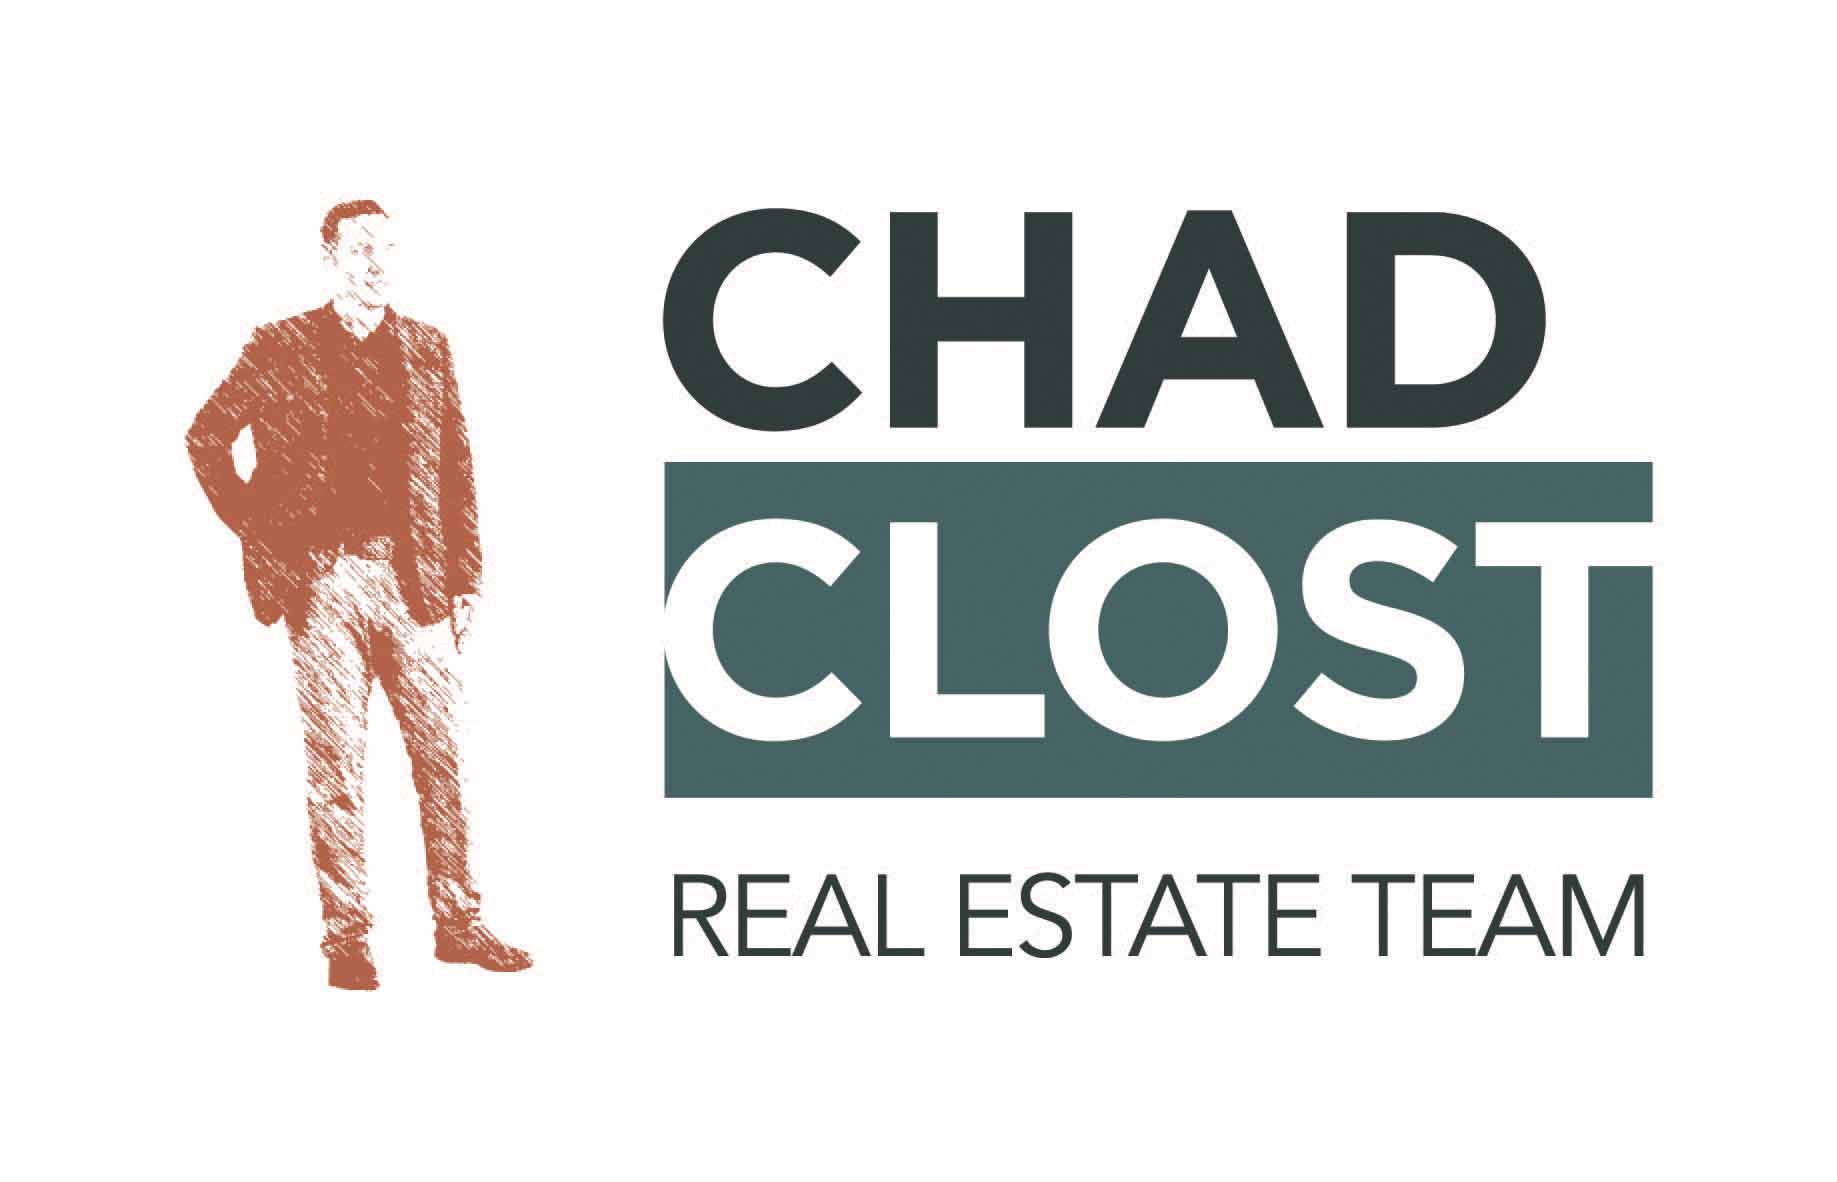 CHAD CLOST REAL ESTATE TEAM